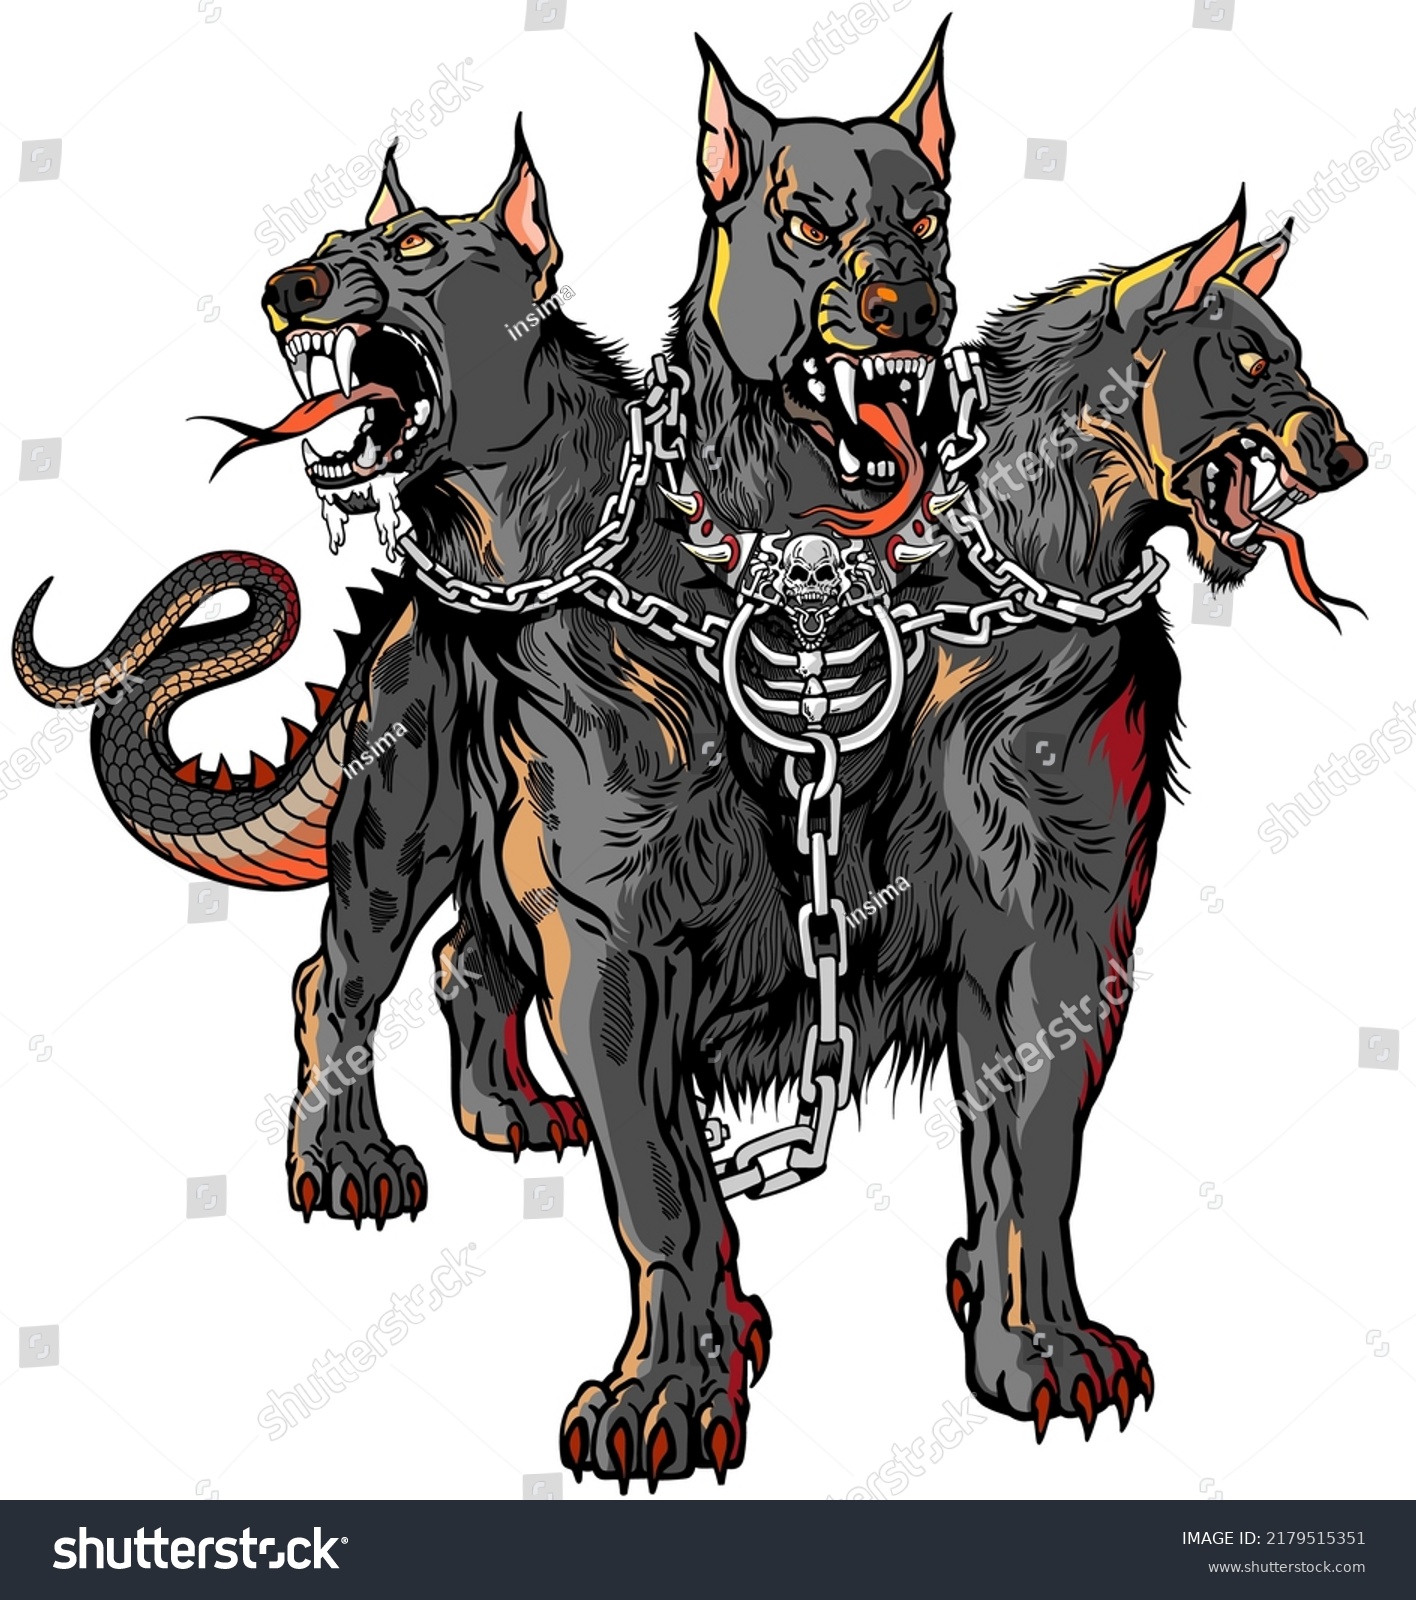 SVG of Cerberus hellhound Mythological three-headed dog the guard of the entrance to hell. Hound of Hades with chain on his neck. Standing pose, front view. Isolated vector illustration svg